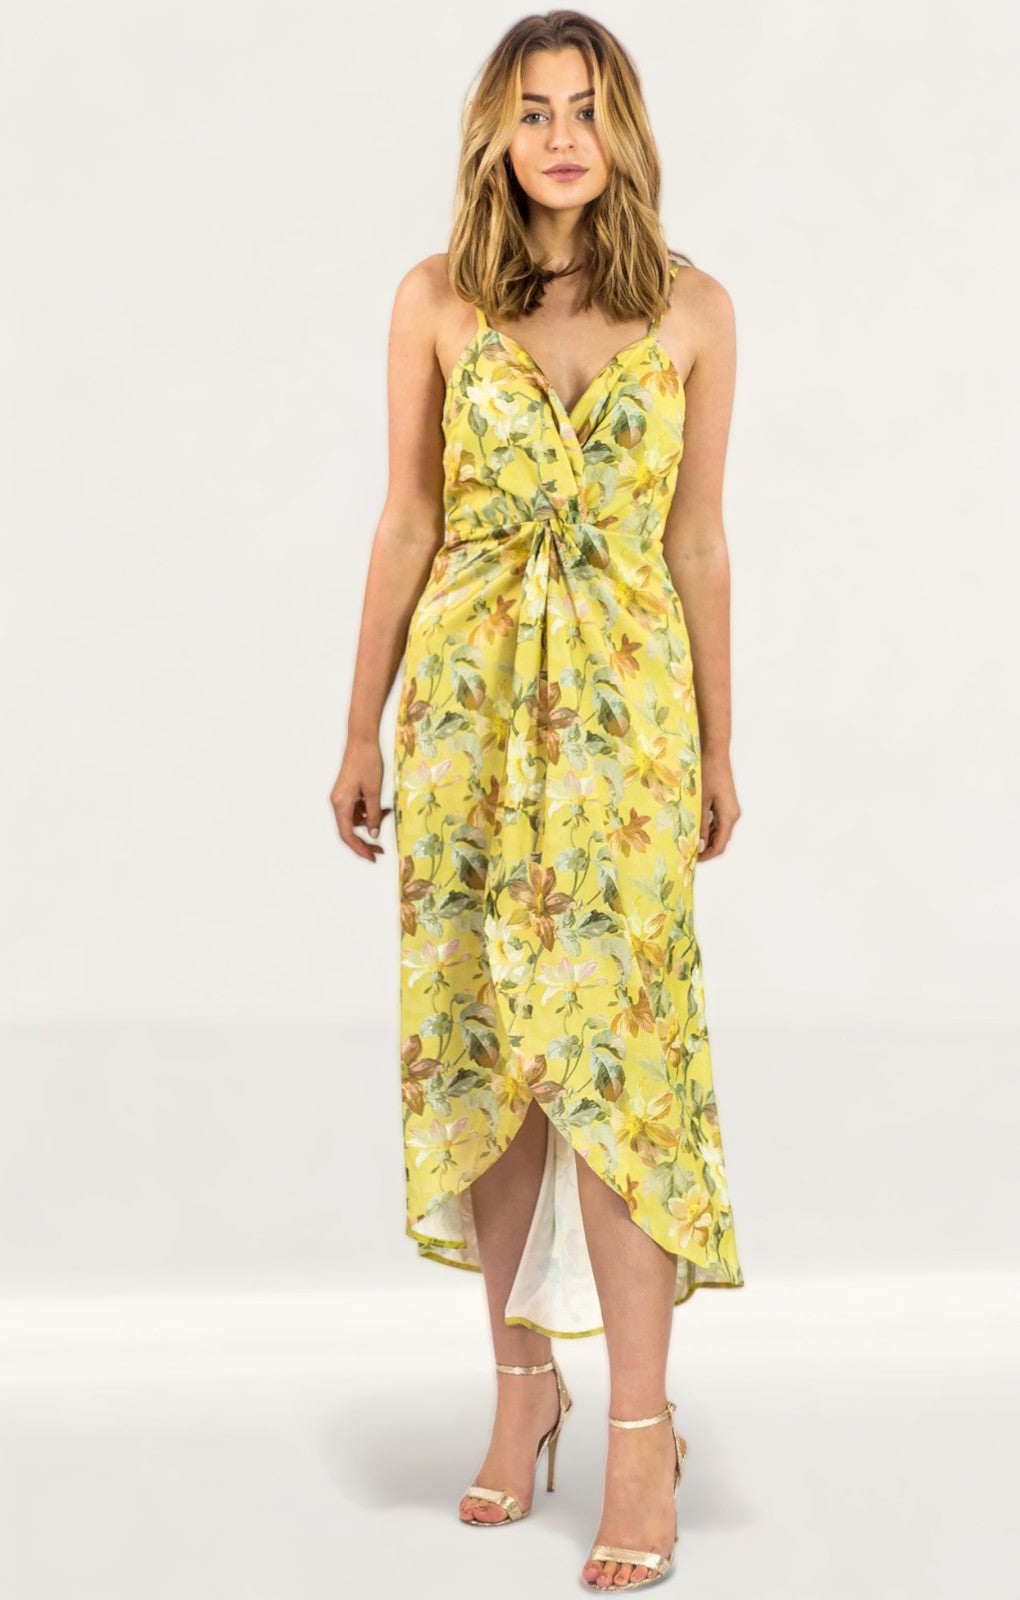 Hope & Ivy Yellow Twist Front Floral Cami Dress product image